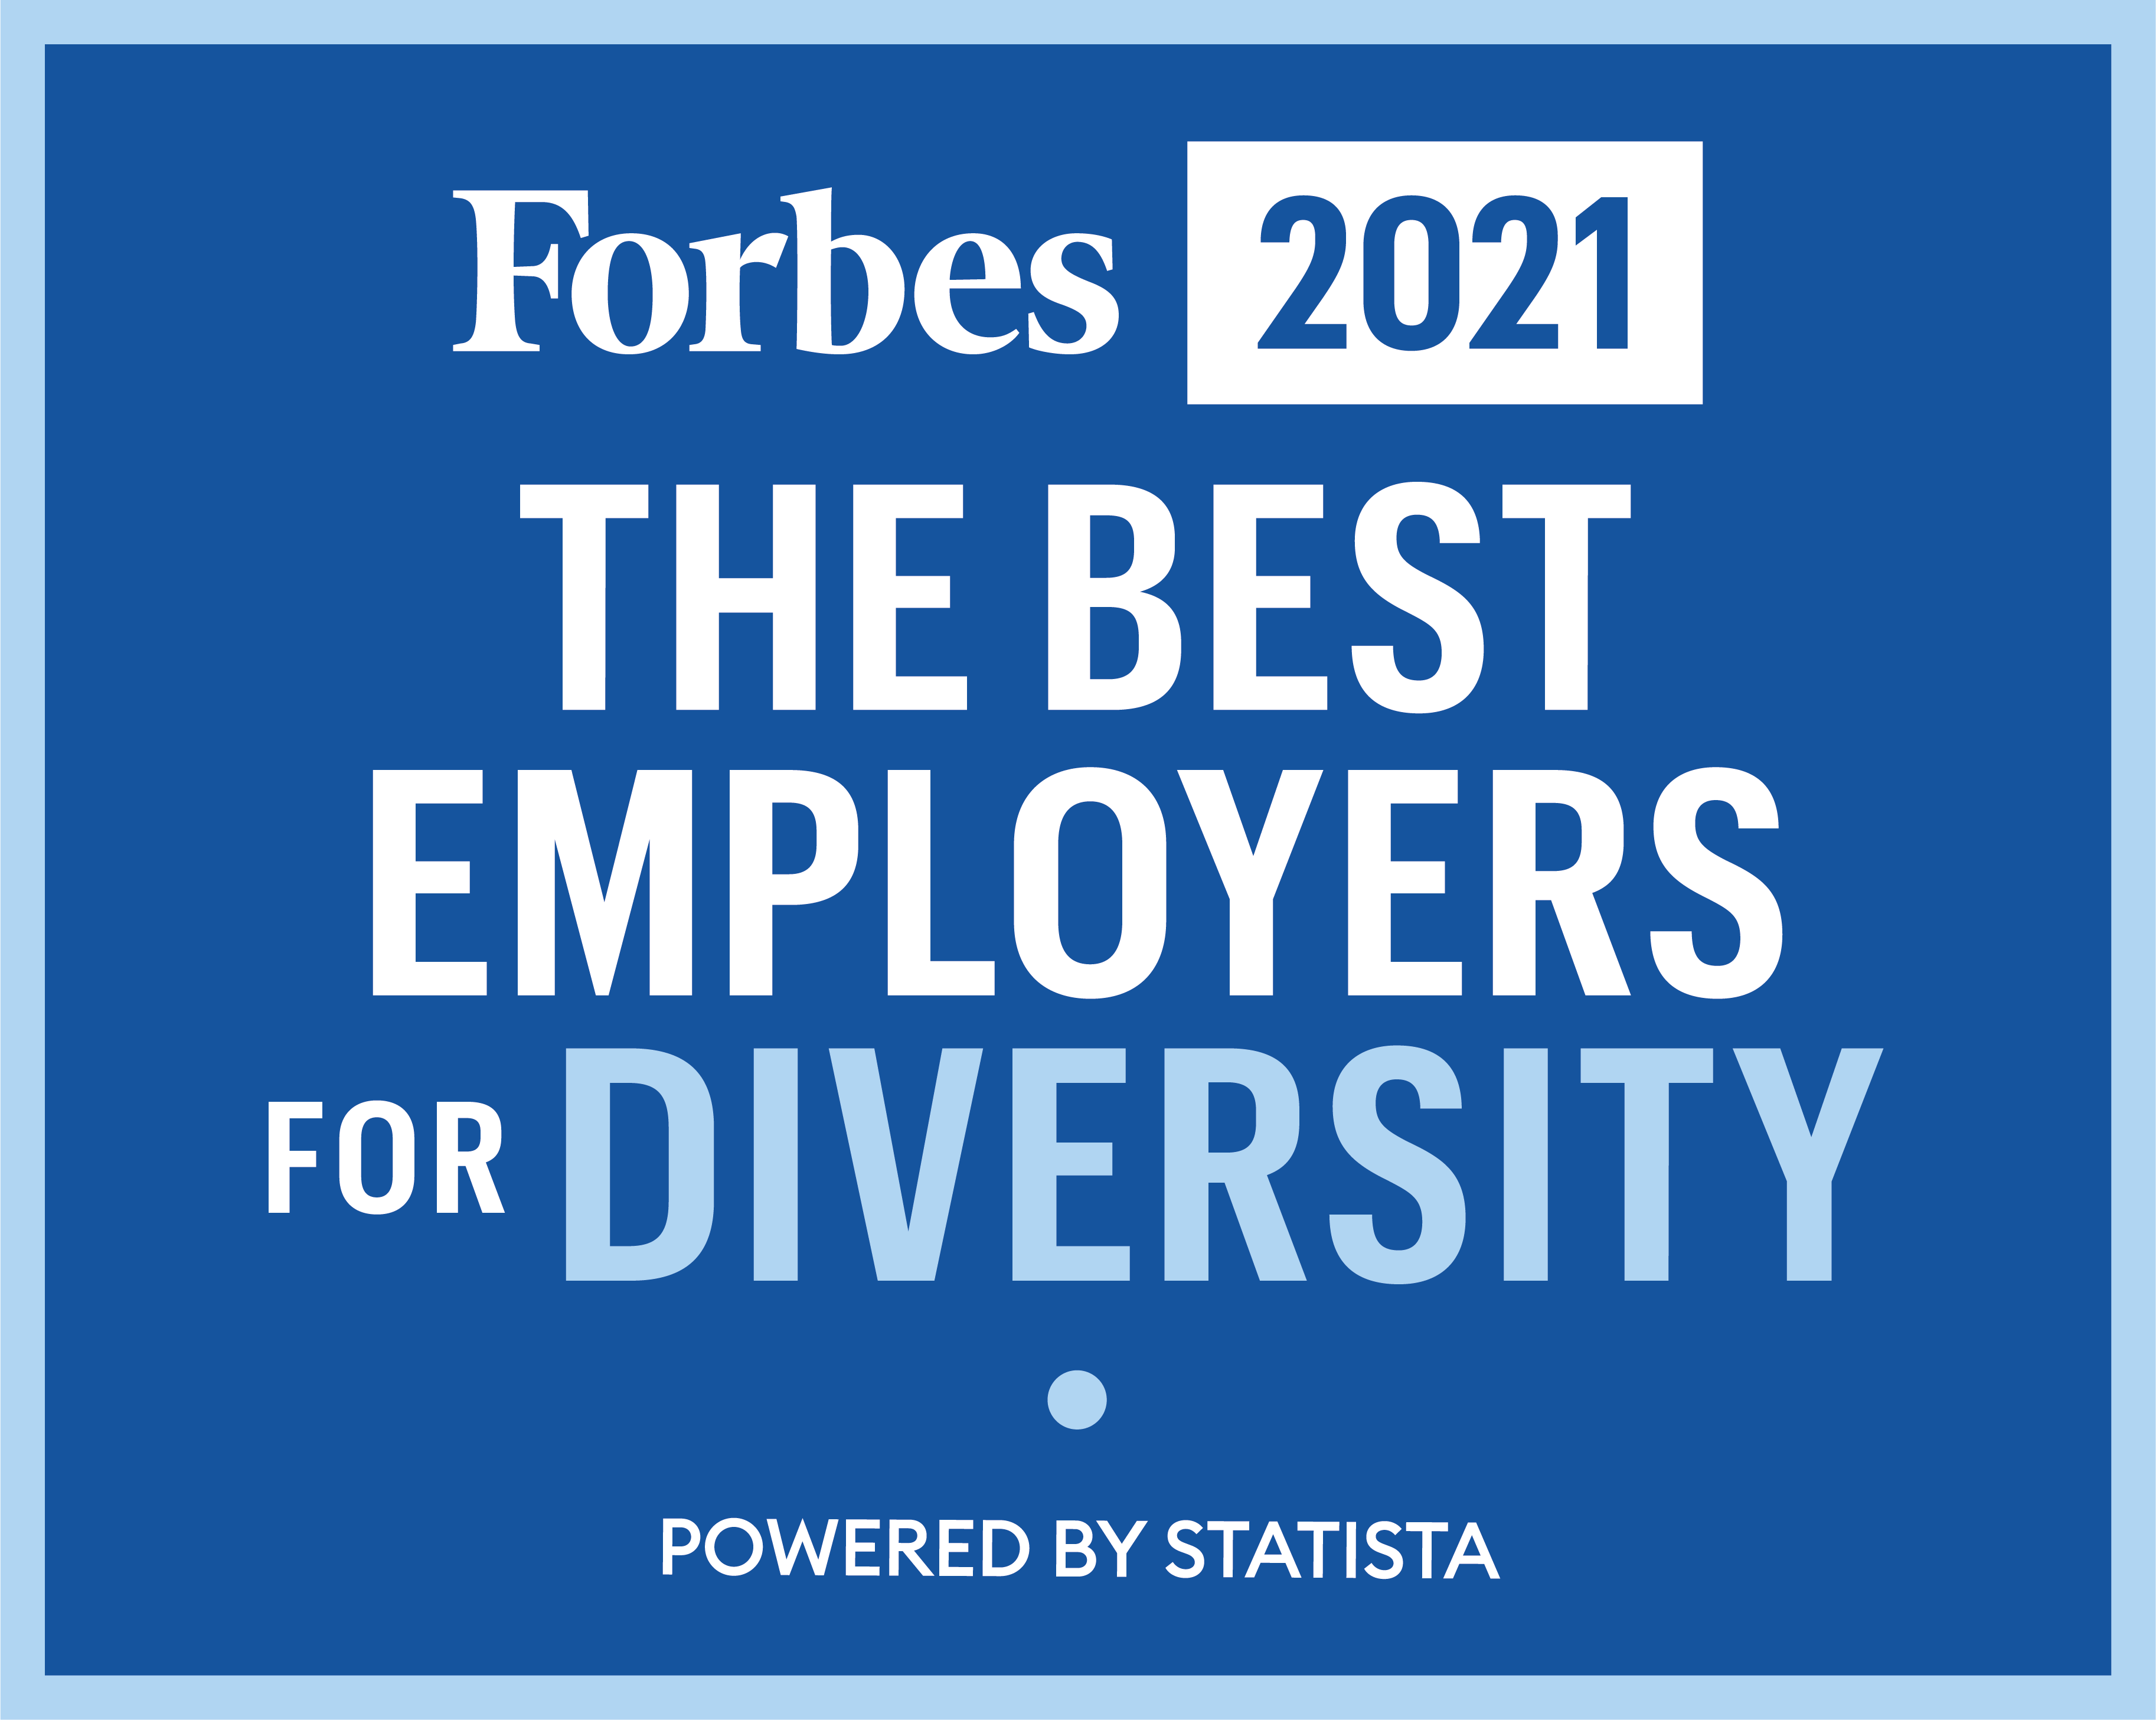 Forbes 2021 Best Employers for Diversity